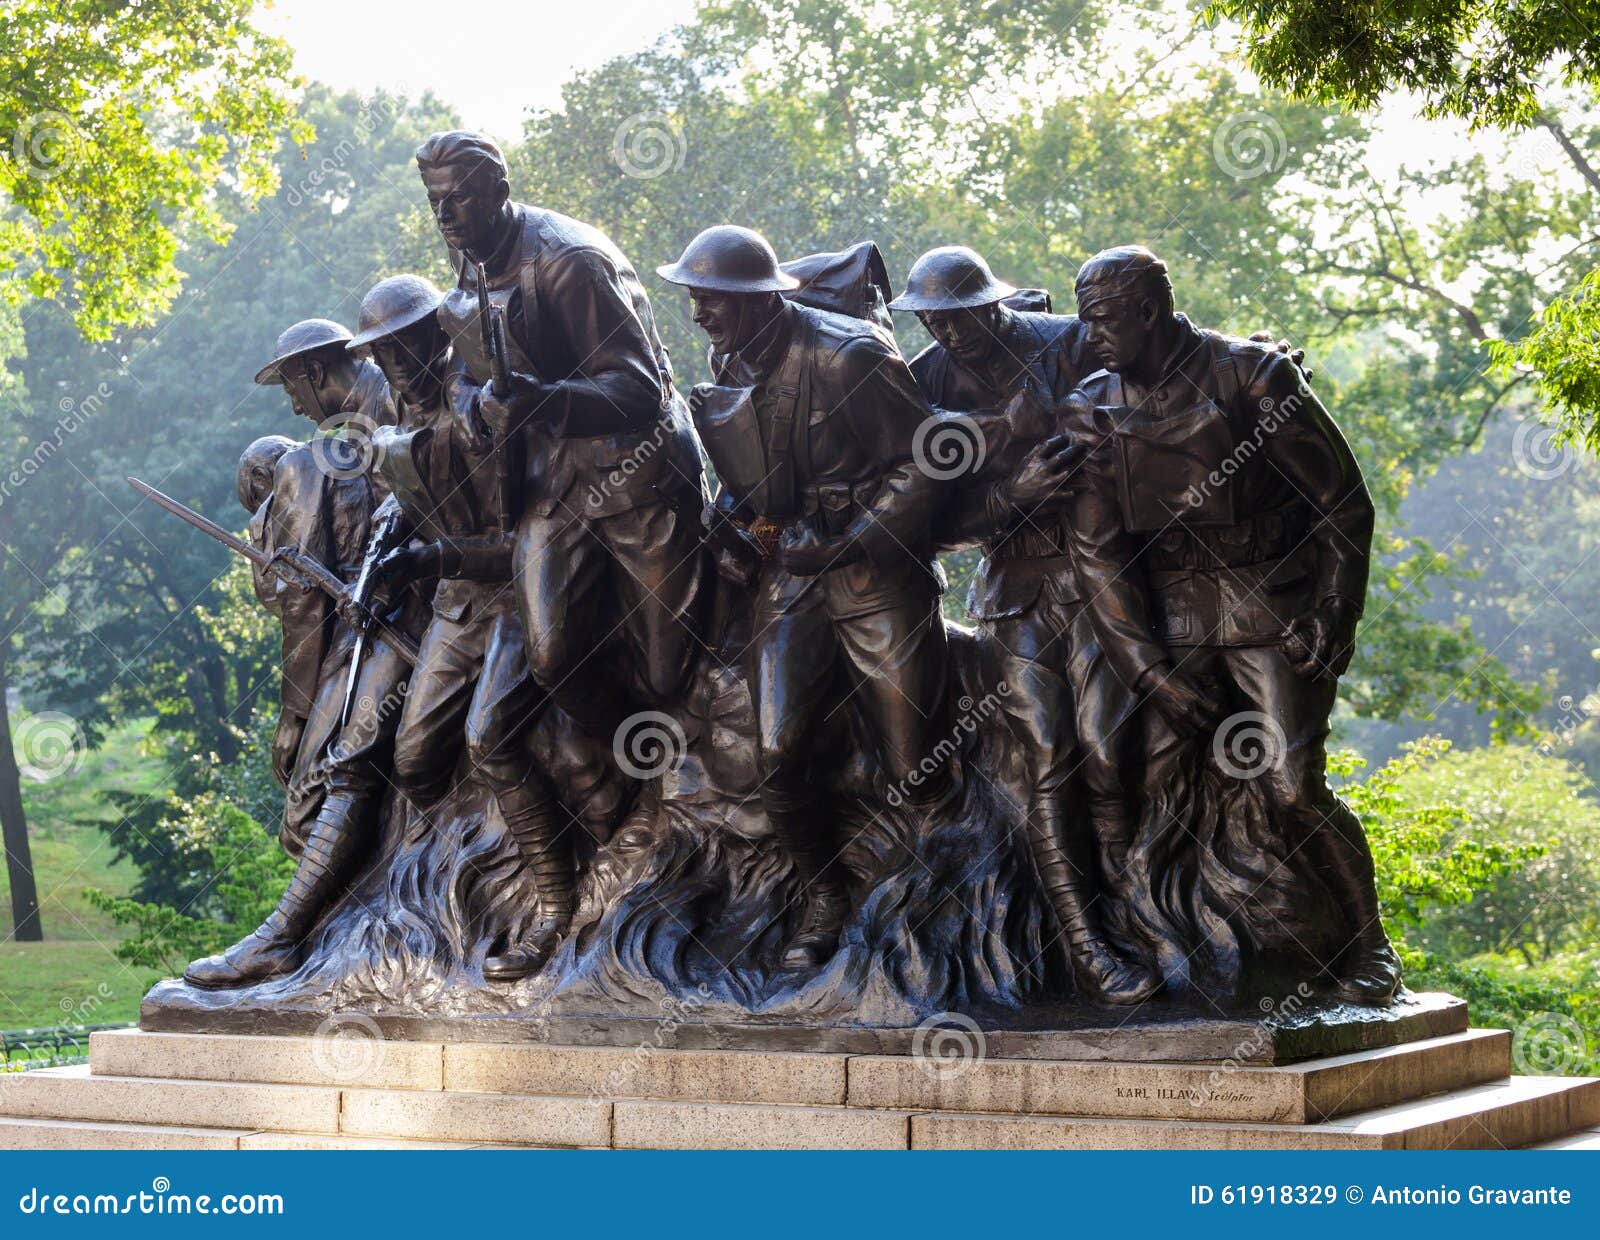 new york statue of soldiers of i world war, central park.